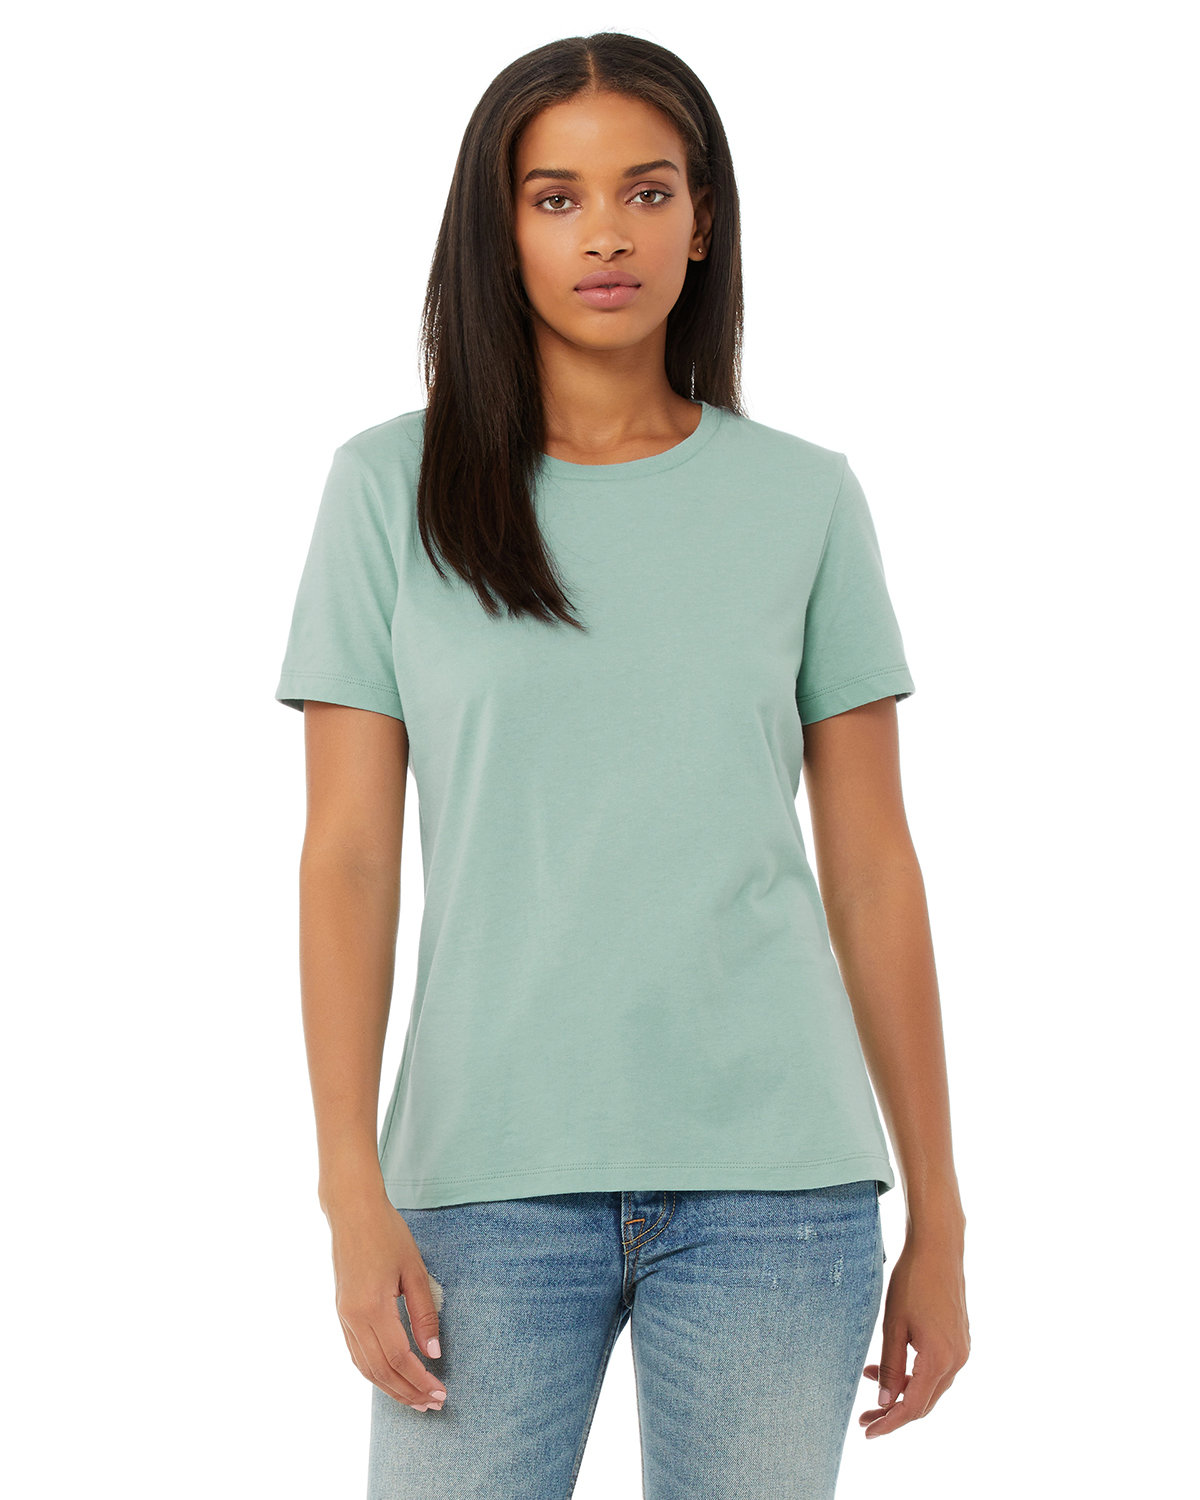 Bella + Canvas Ladies' Relaxed Jersey Short-Sleeve T-Shirt DUSTY BLUE 